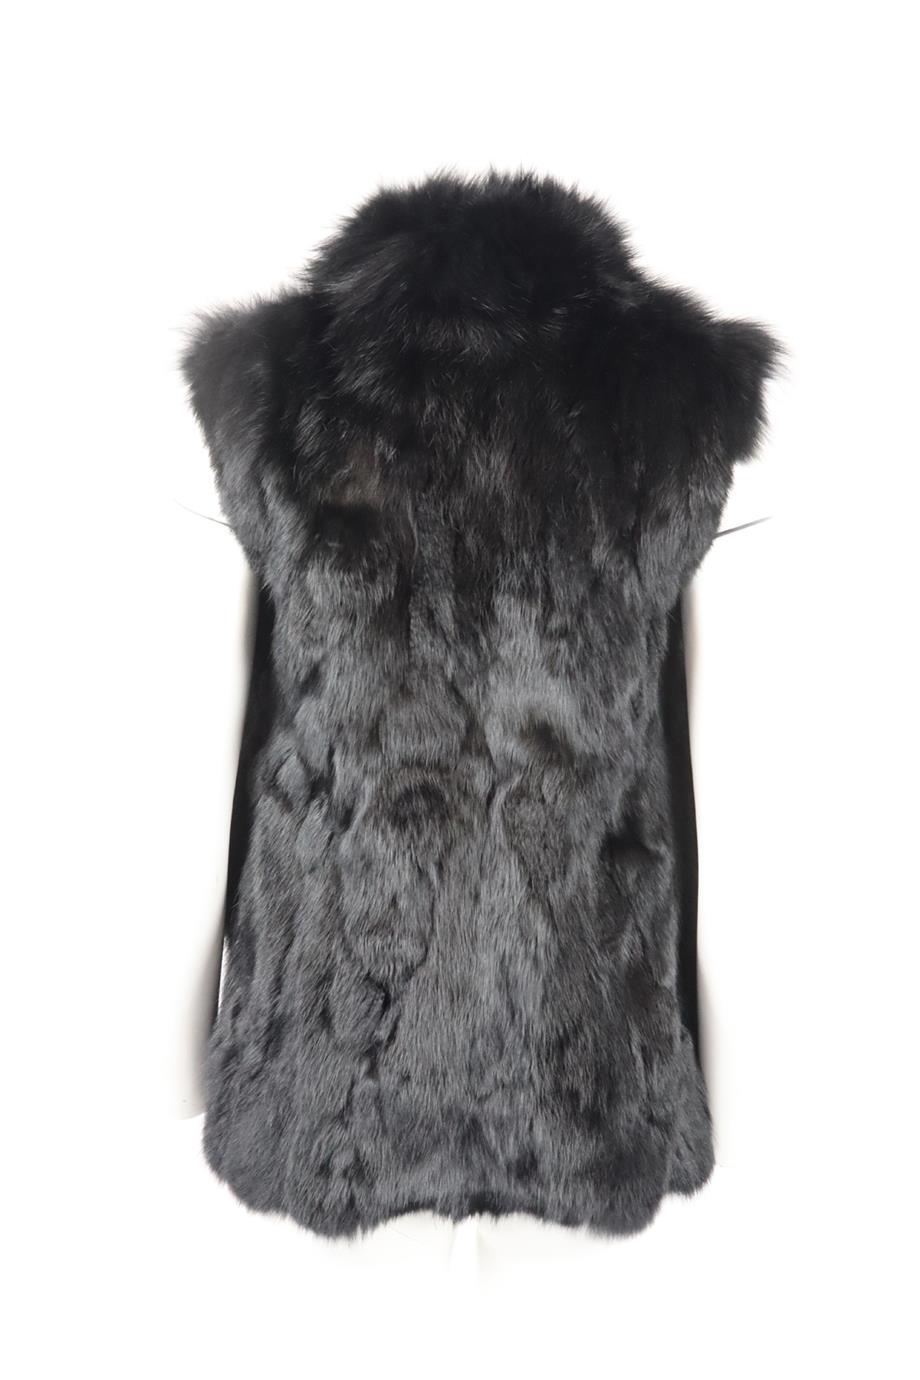 Adrienne Landau Rabbit And Fox Fur Gilet Small In Excellent Condition In London, GB